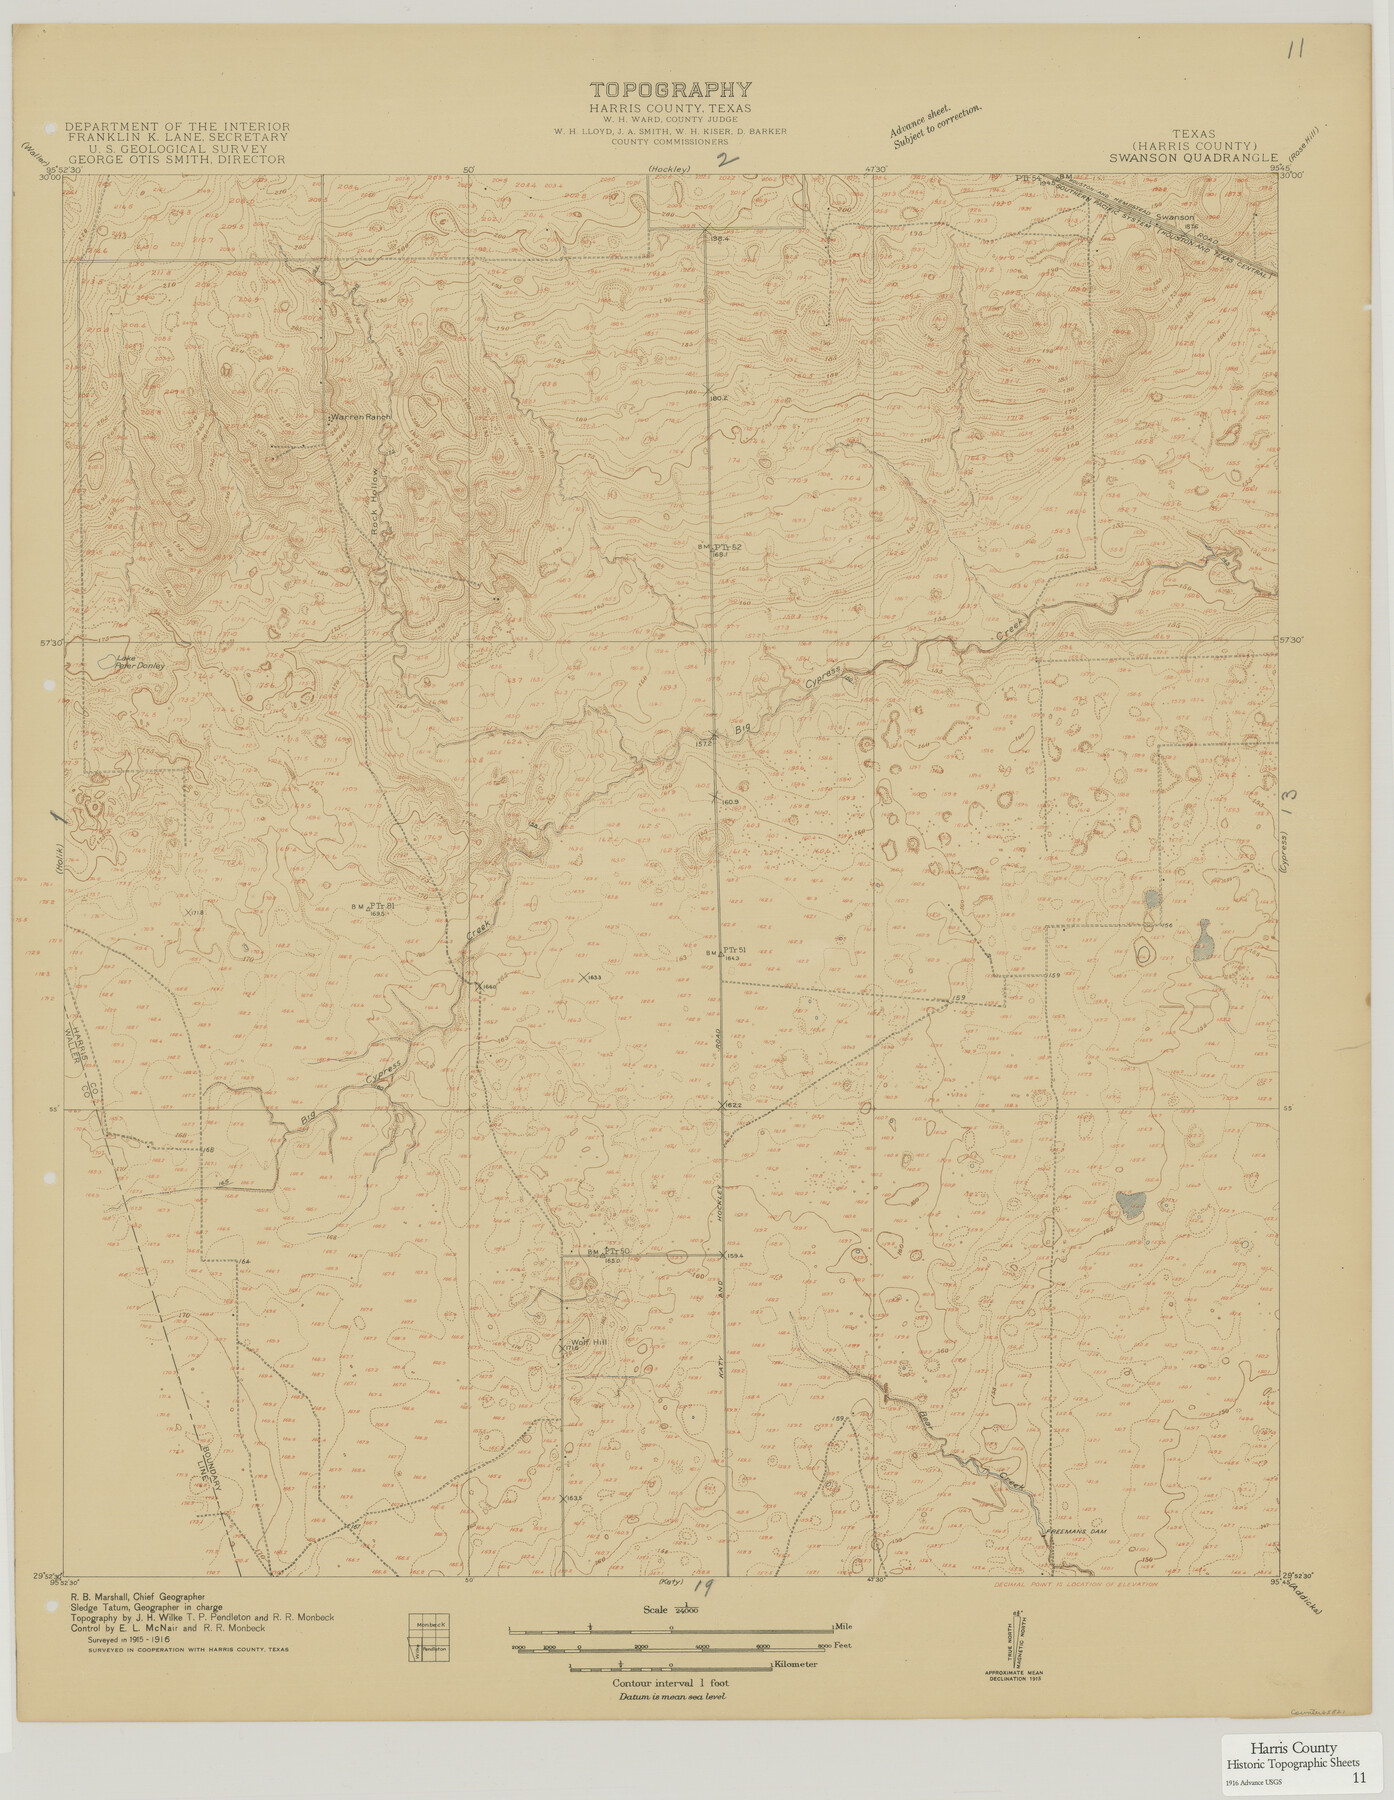 65821, Harris County Historic Topographic 11, General Map Collection